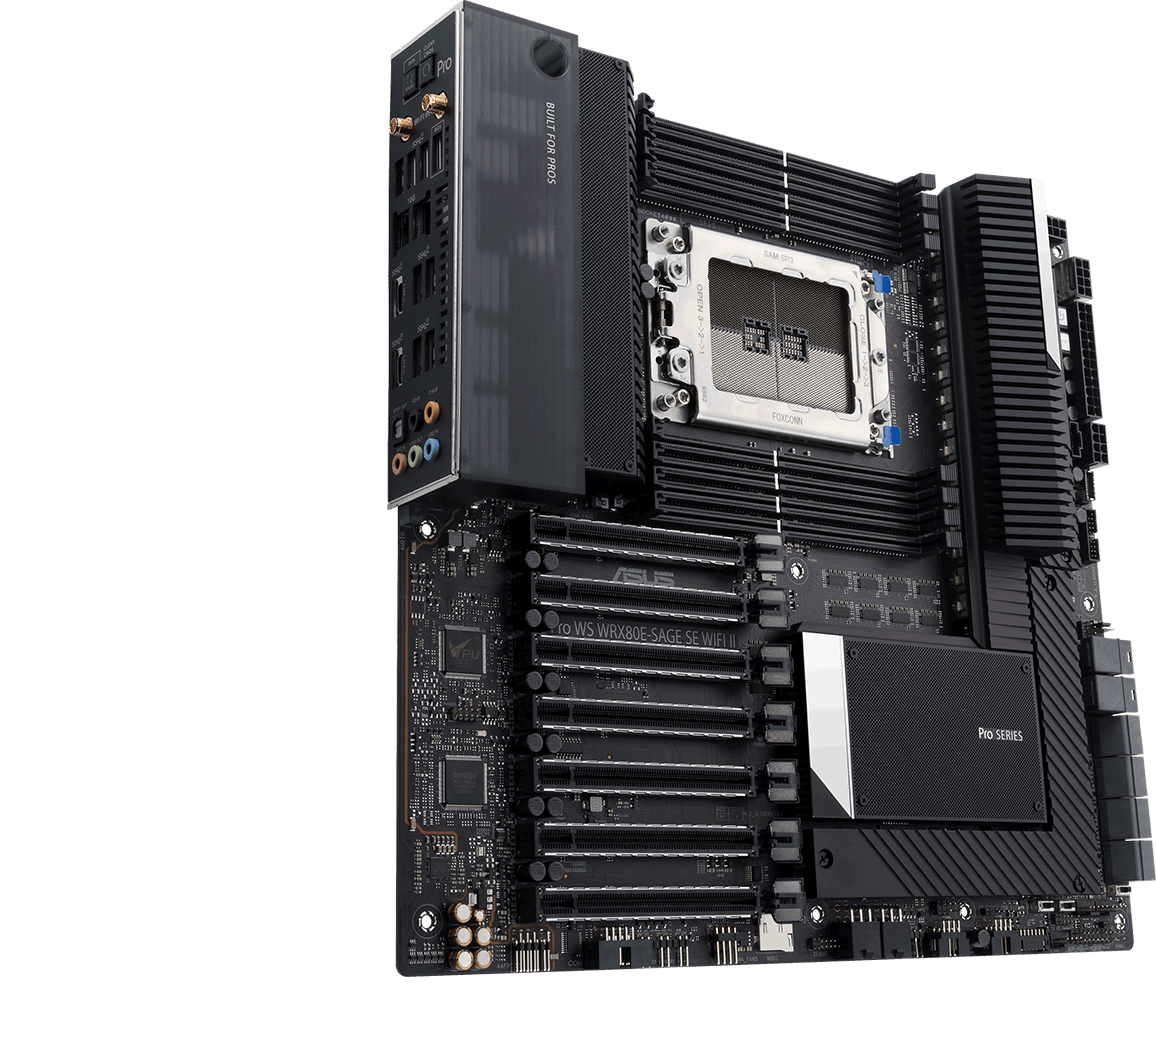 Motherboard overview